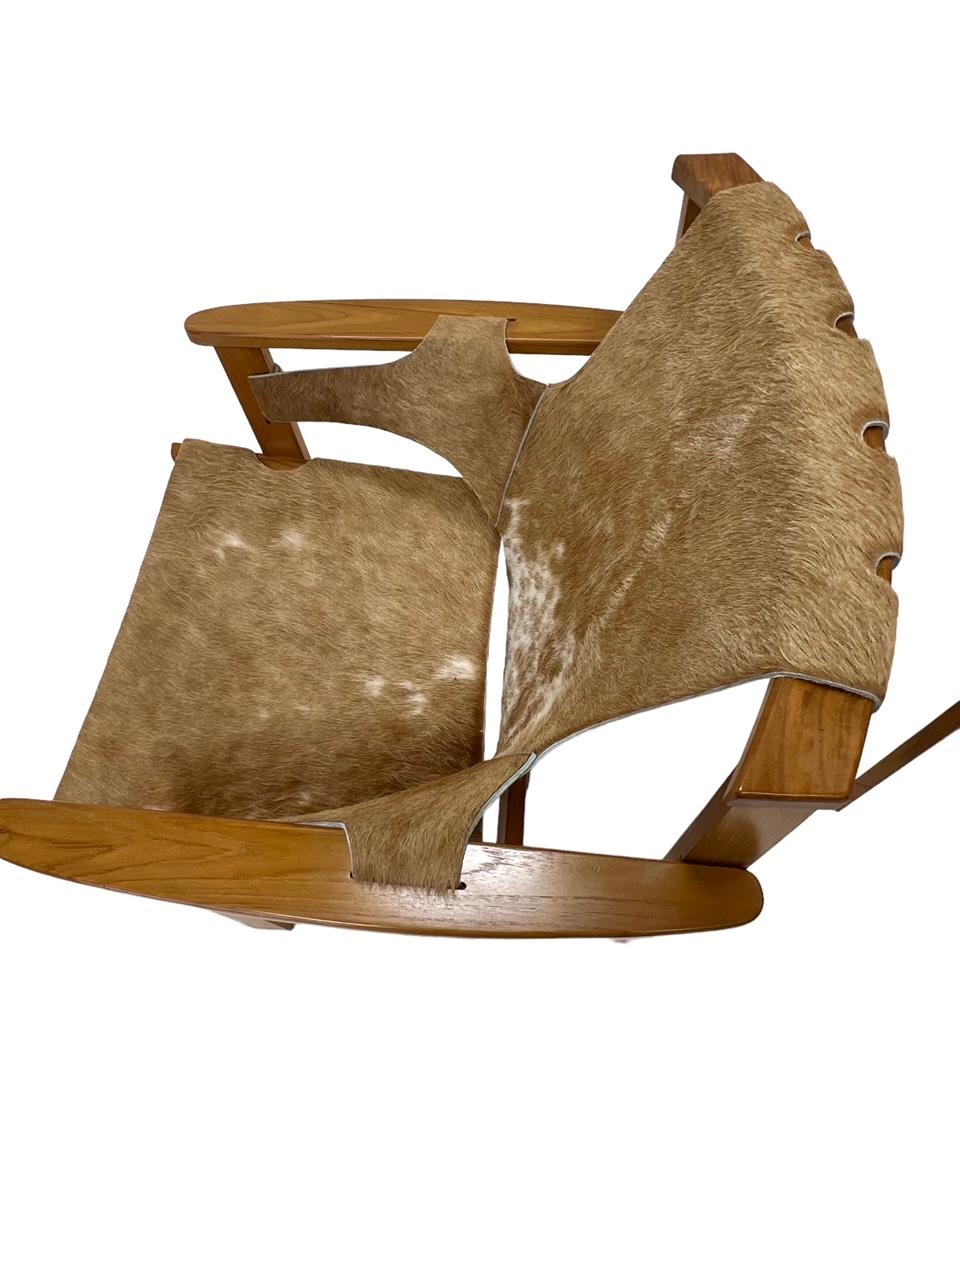 Carl Axel Acking Trienna Lounge Chairs in Brazilian Cowhide In Good Condition For Sale In Saint Louis, US